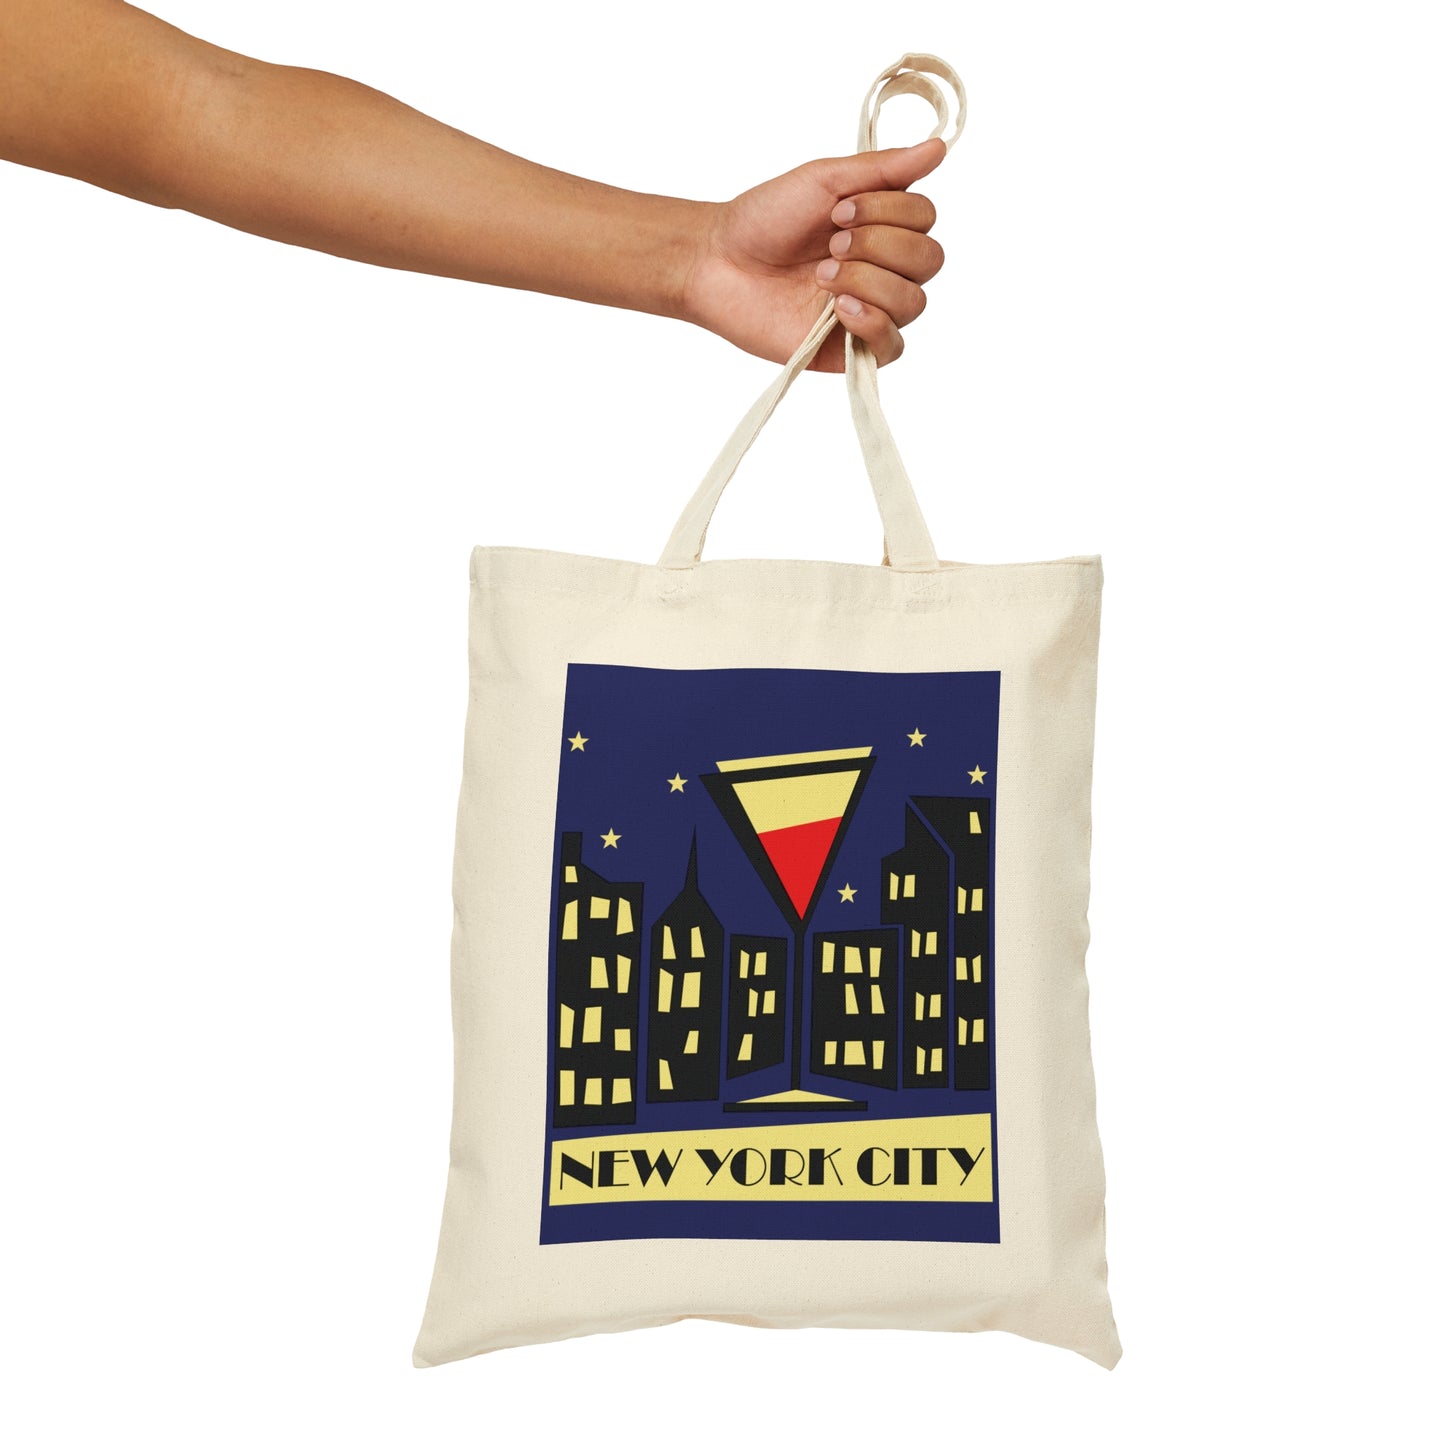 New York City Modern Abstract Art Canvas Shopping Cotton Tote Bag